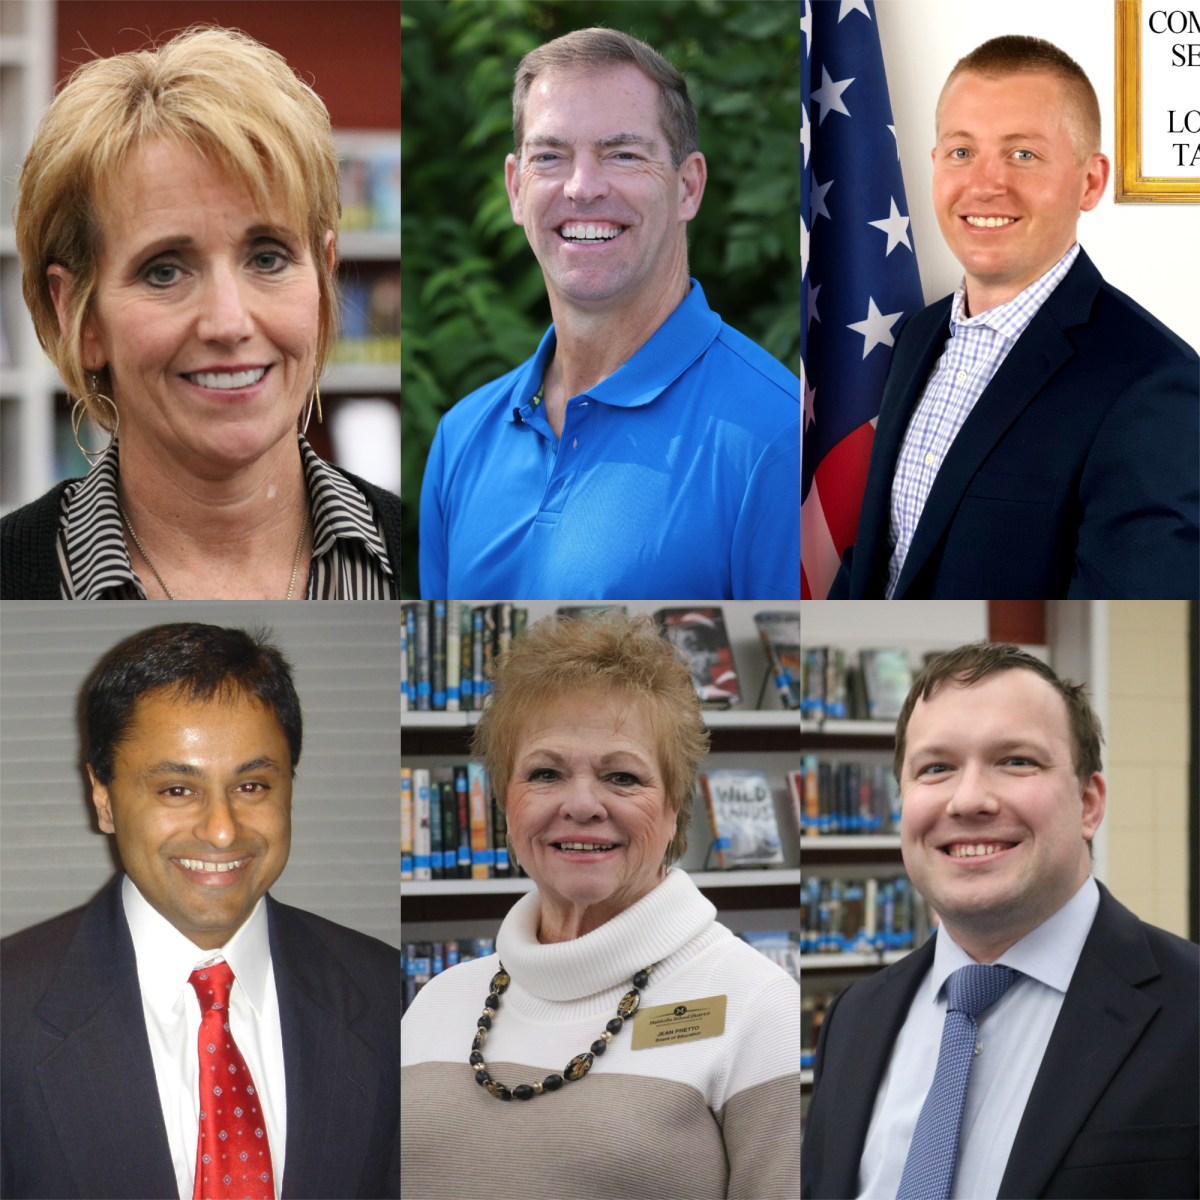 The+six+candidates+running+for+the+two+two-year+term+seats+on+the+Mehlville+Board+of+Education.+%0A%0ATop+row%2C+in+alphabetical+order+from+left%3A+Incumbent+Peggy+Hassler%2C+Bob+Mahacek+and+Mike+Moore.+%0A%0ABottom+row%2C+in+alphabetical+order+from+left%3A+Venki+Palamand%2C+Incumbent+Jean+Pretto+and+Sasha+Schmittgens.